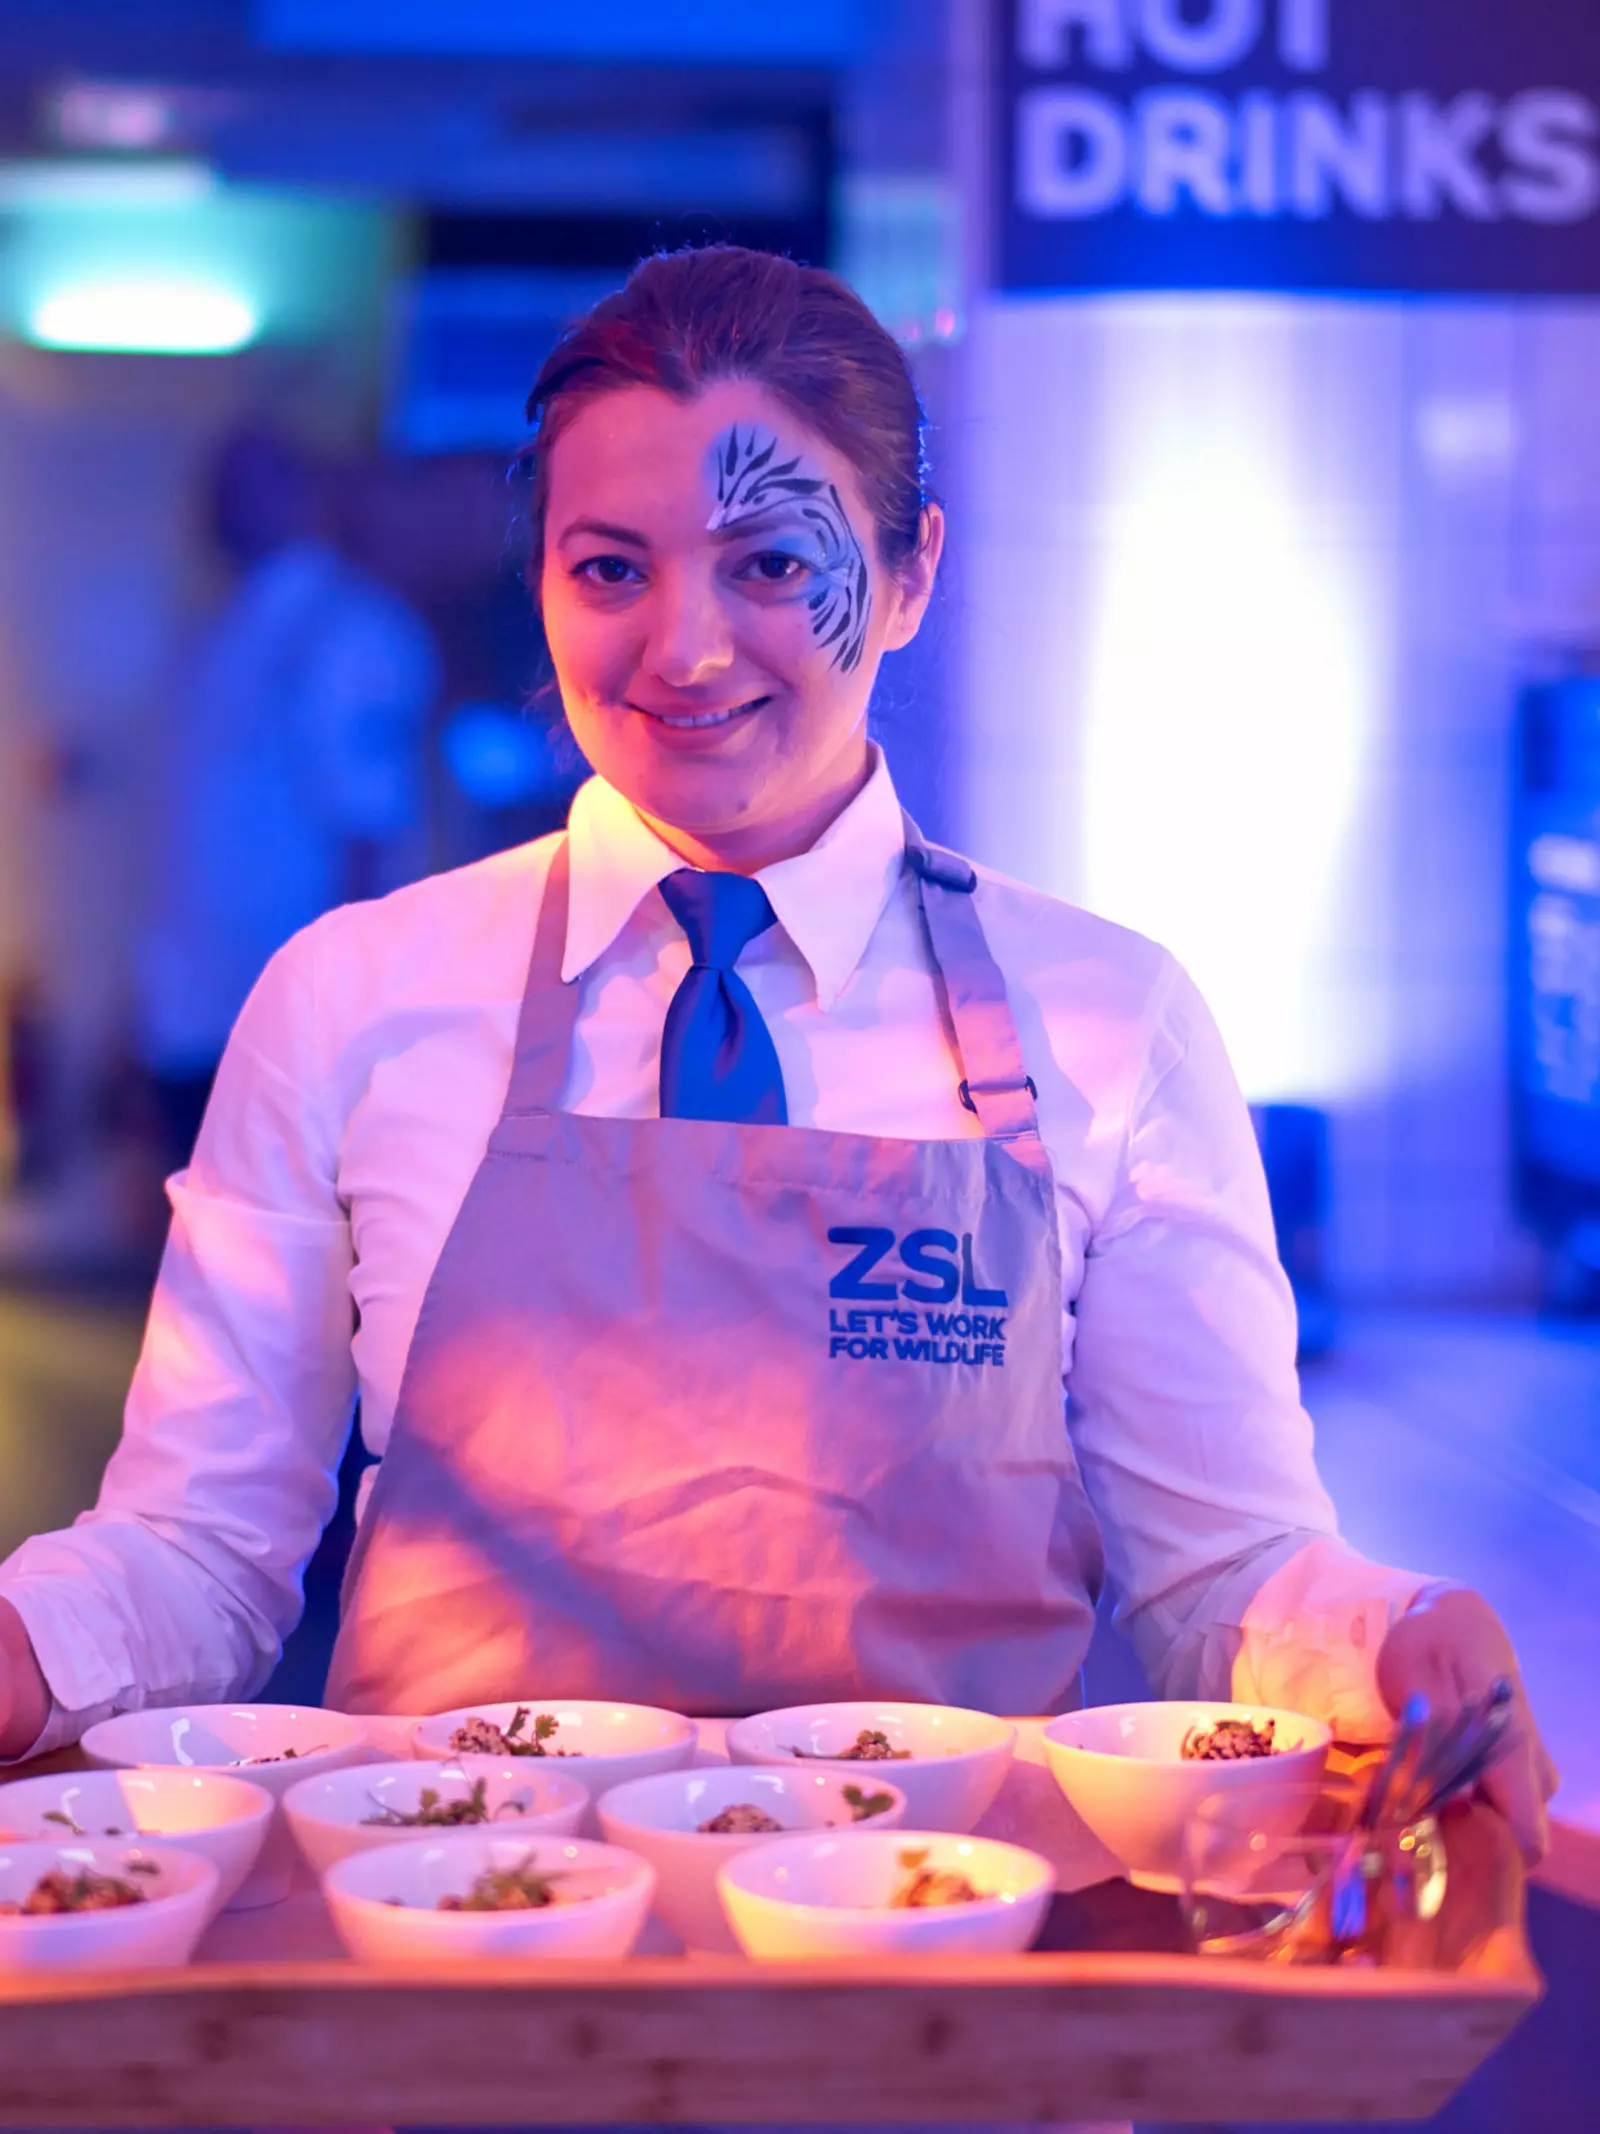 A young woman with facepaint on the left side of her face holding a tray of bowl food at an evening event